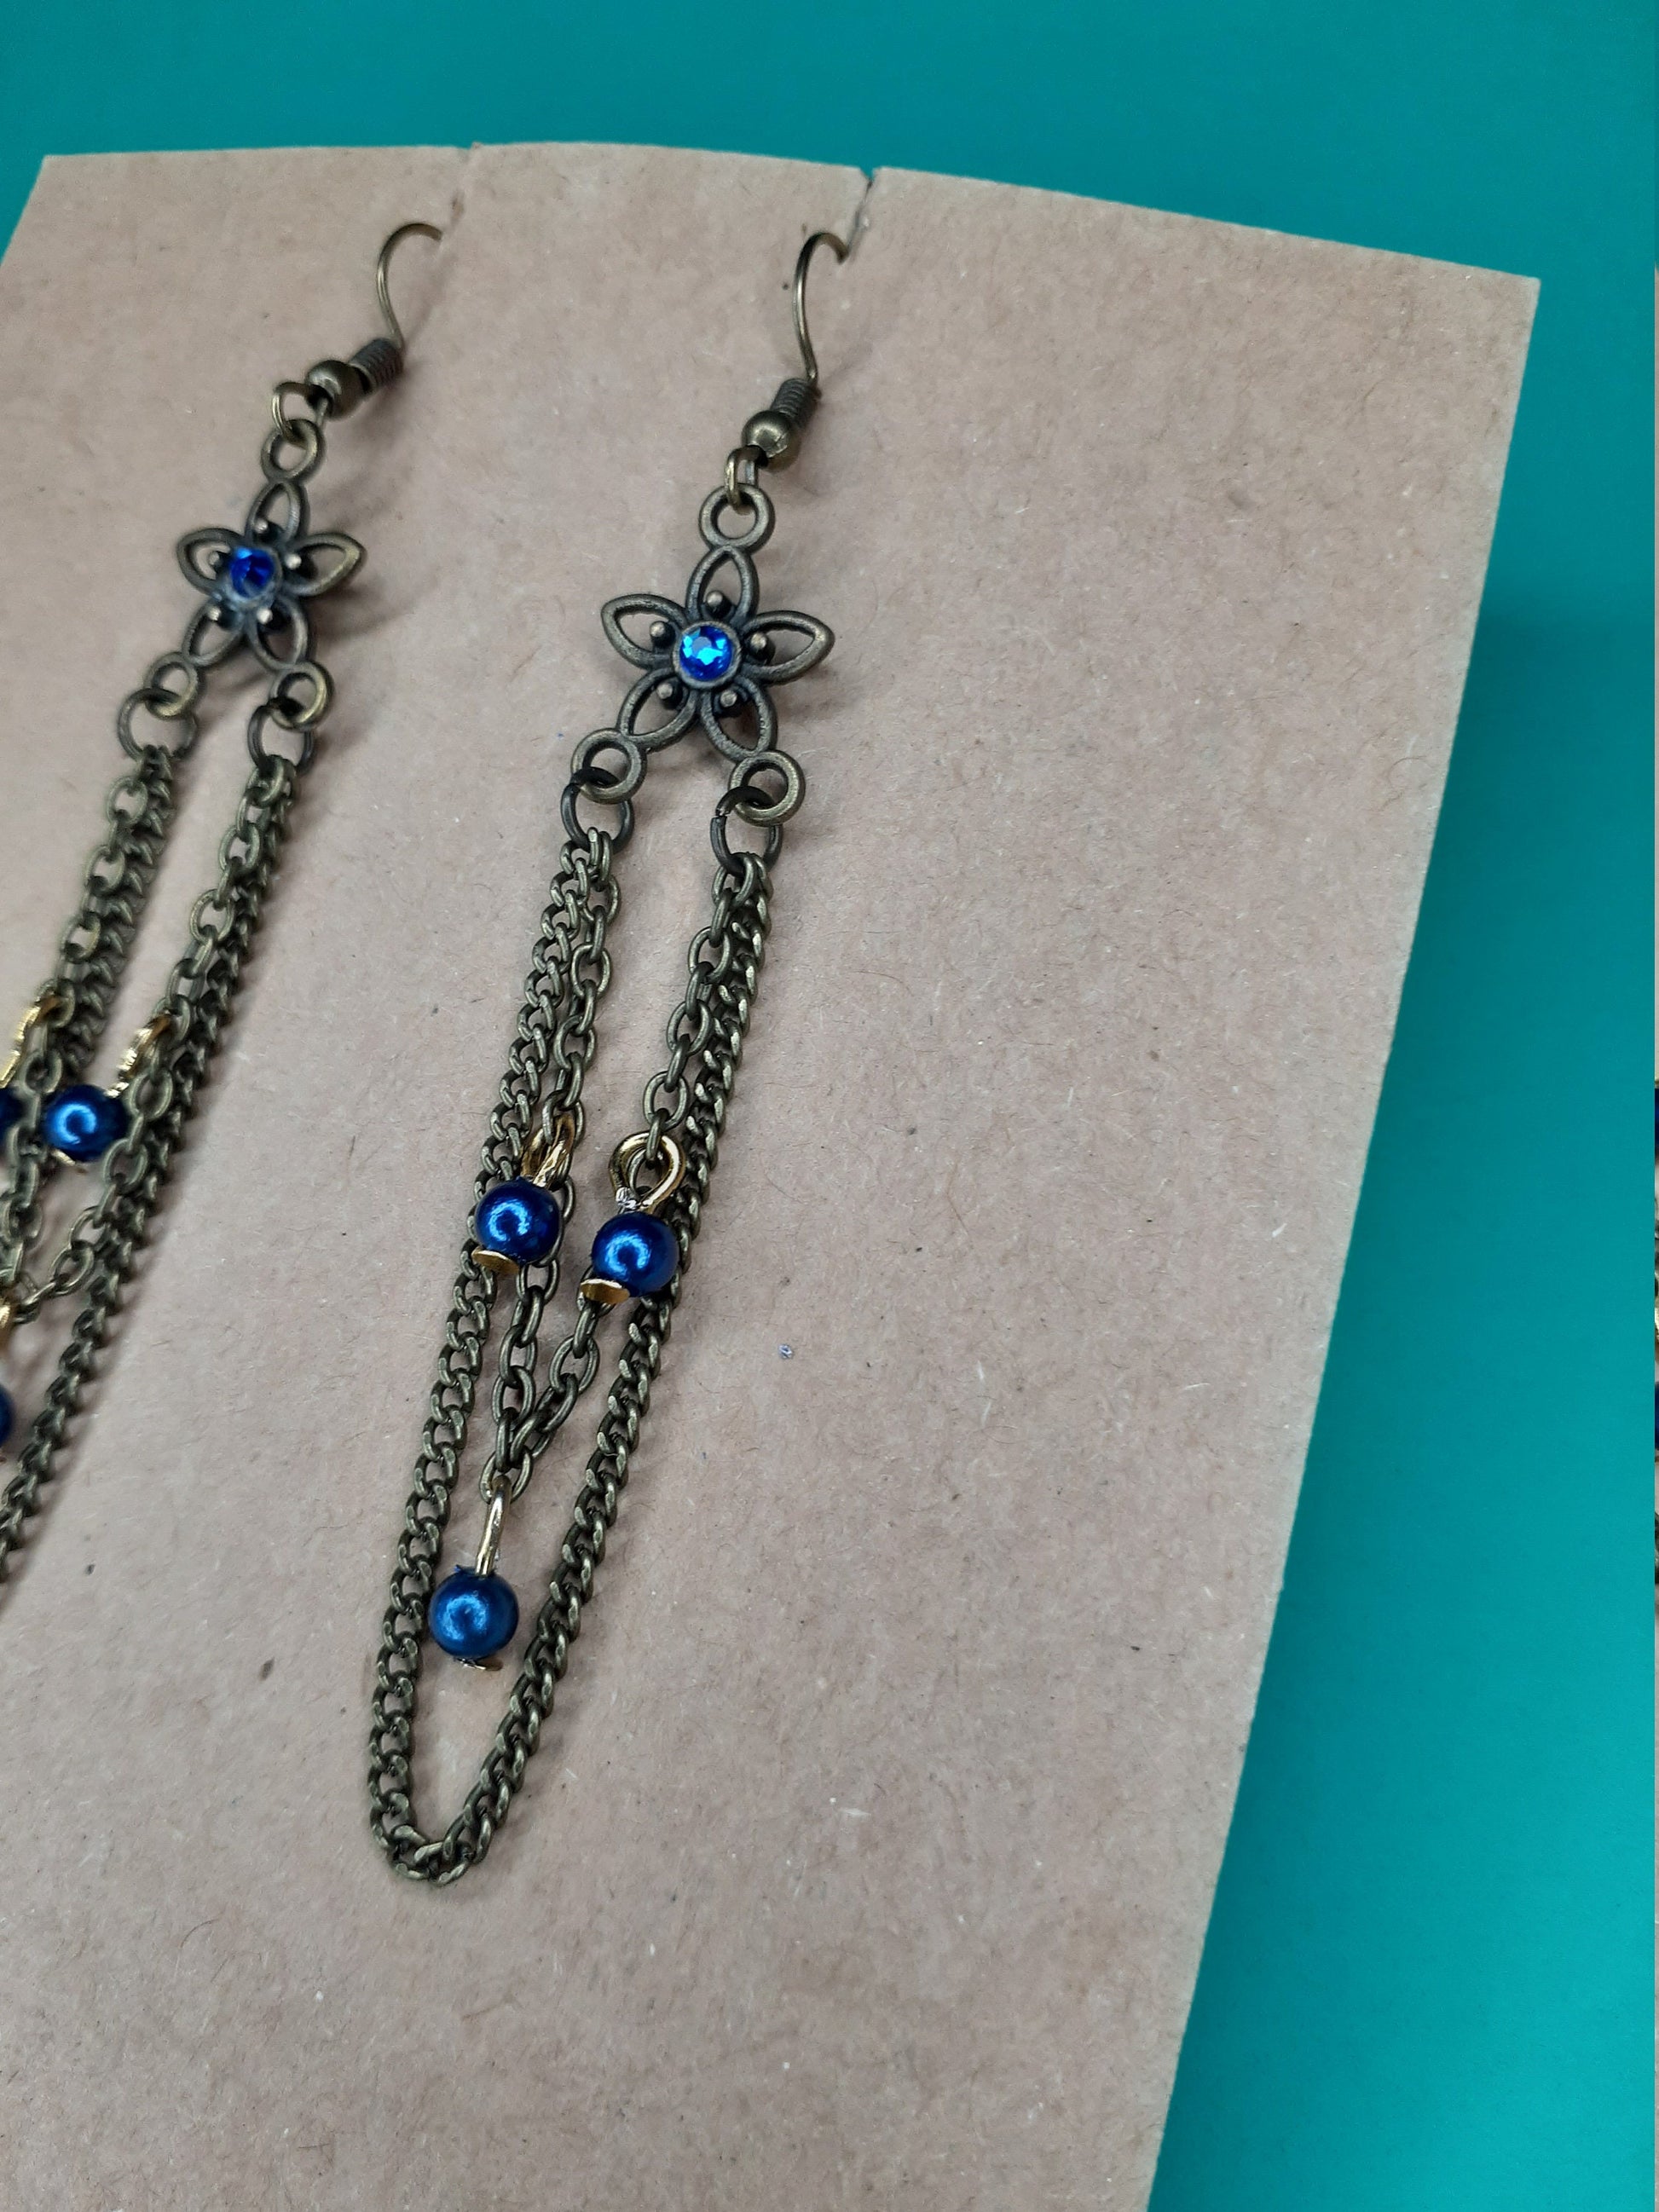 Vintage inspired earrings. Blue accents on bronze.